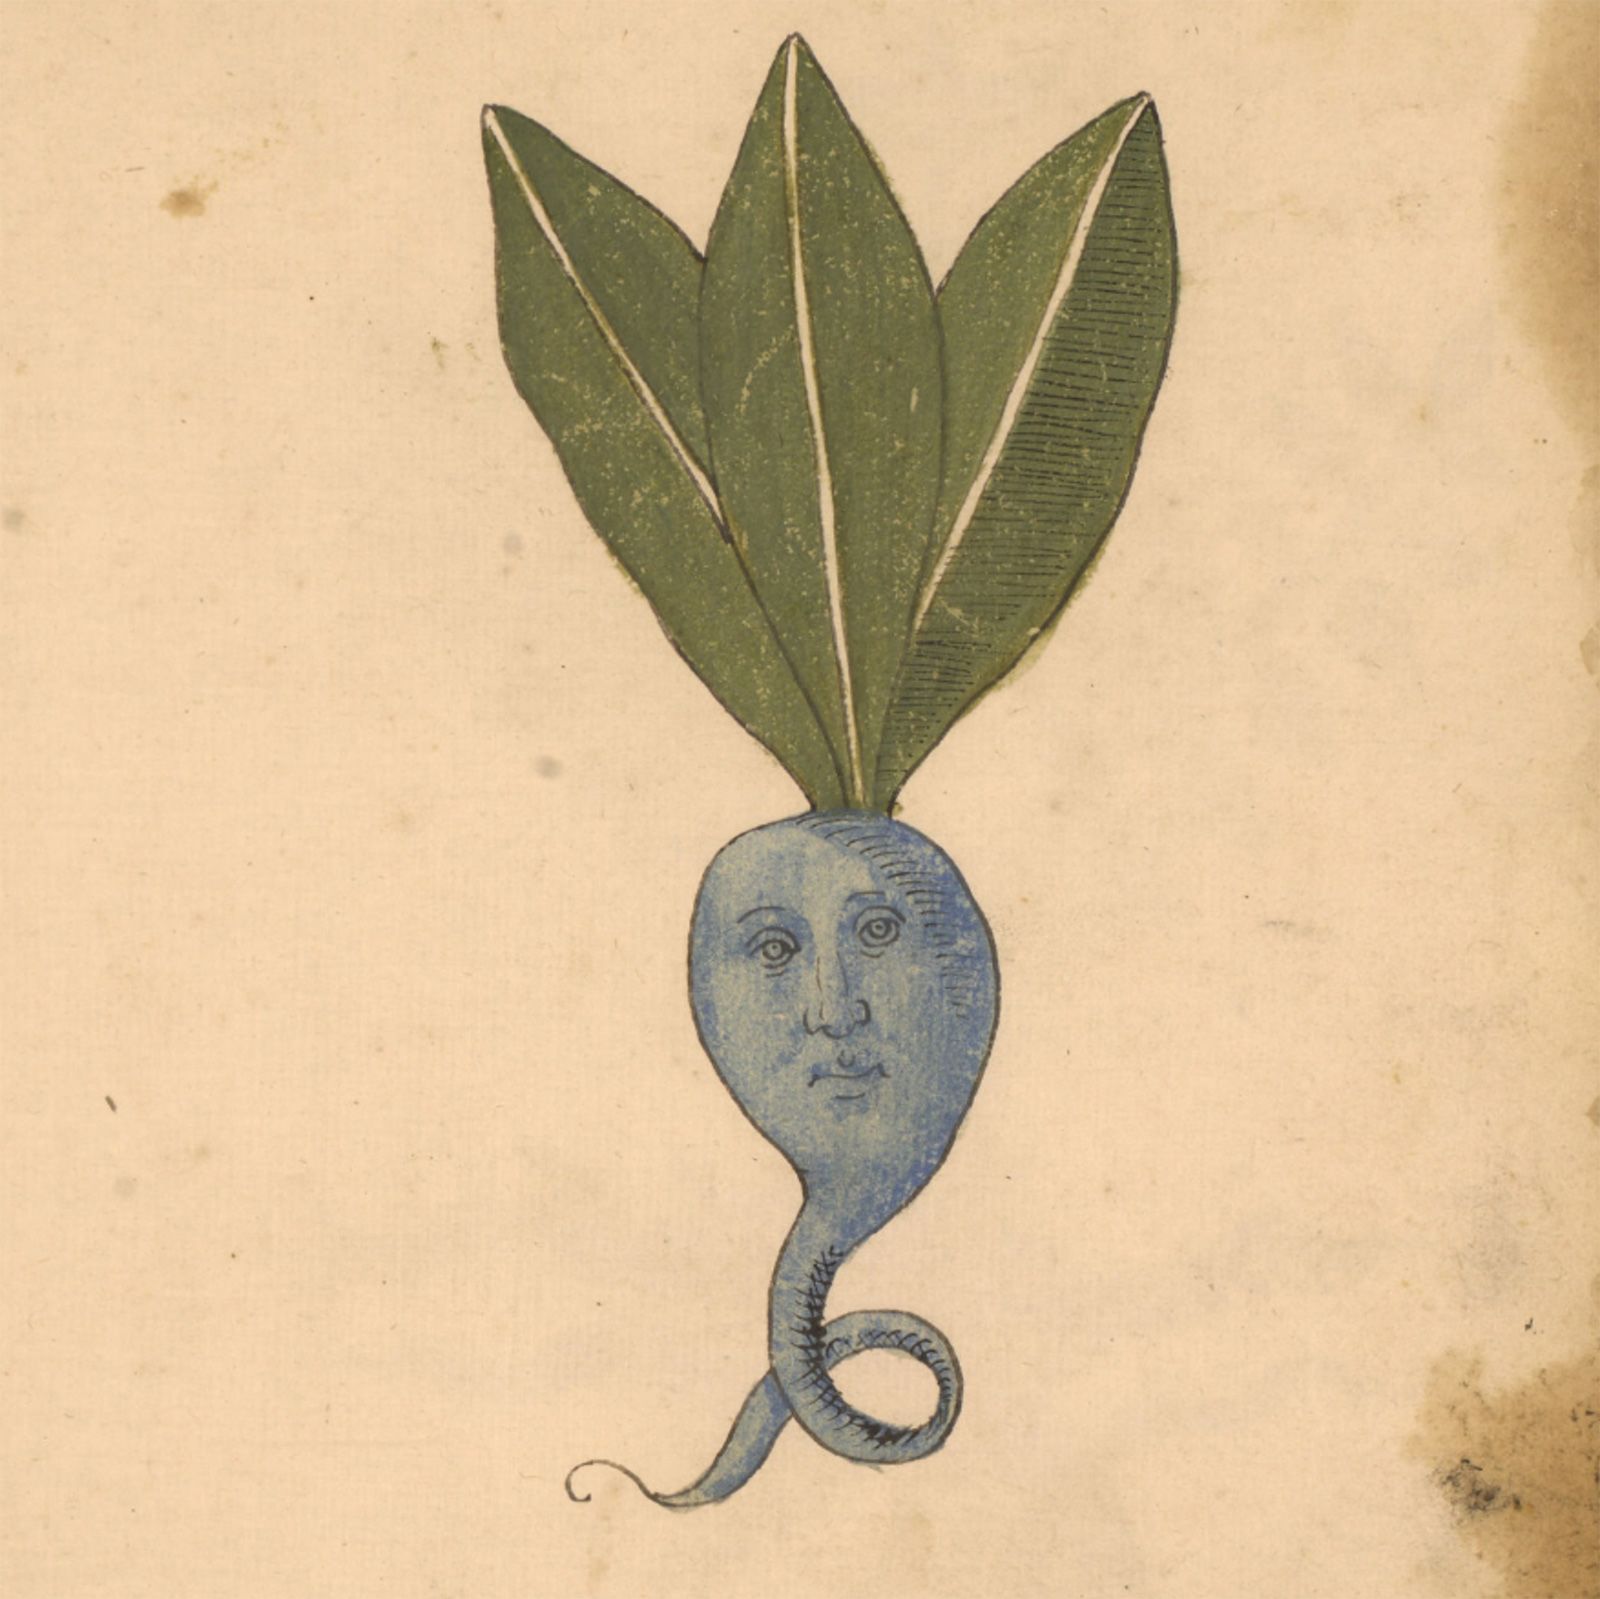 "Plants can be weird little guys, too," according to Swarthout. This illustration is part of a Italian compendium of medicinal herbs, many of whom have faces and, clearly, some thoughts about the situation.